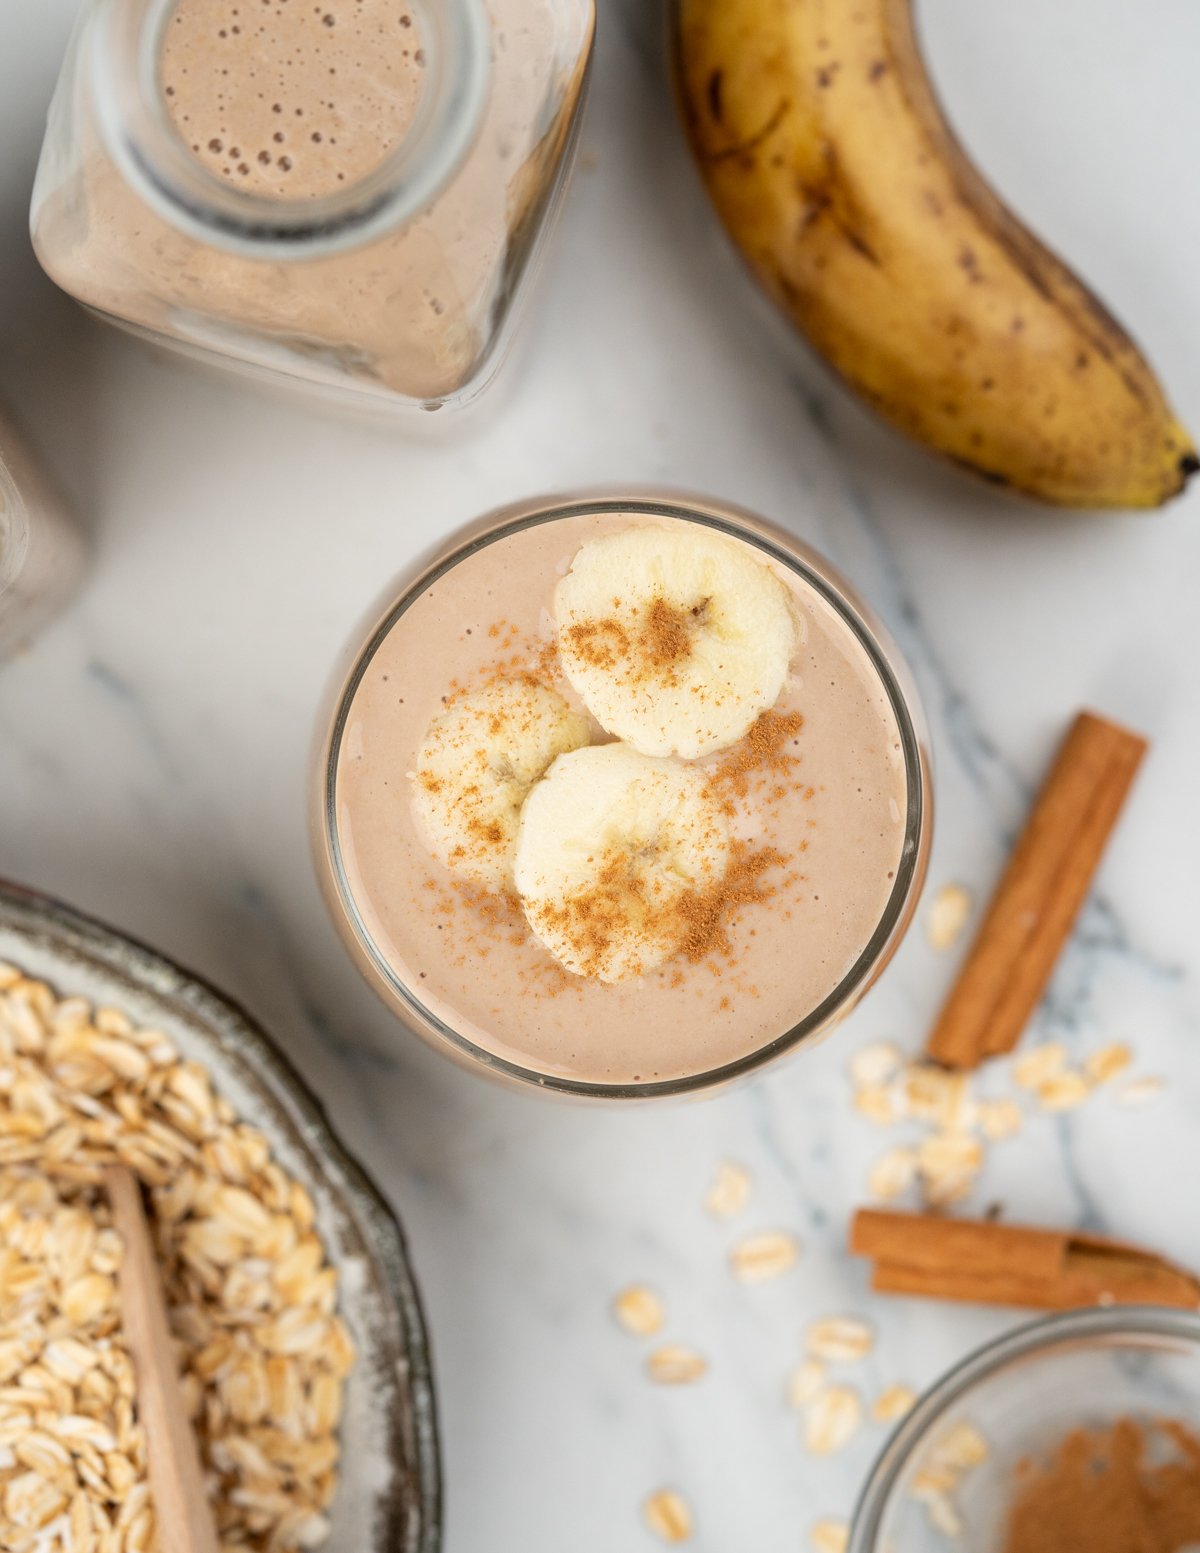 Creamy oatmeal banana smoothie served chiiled in a glass.